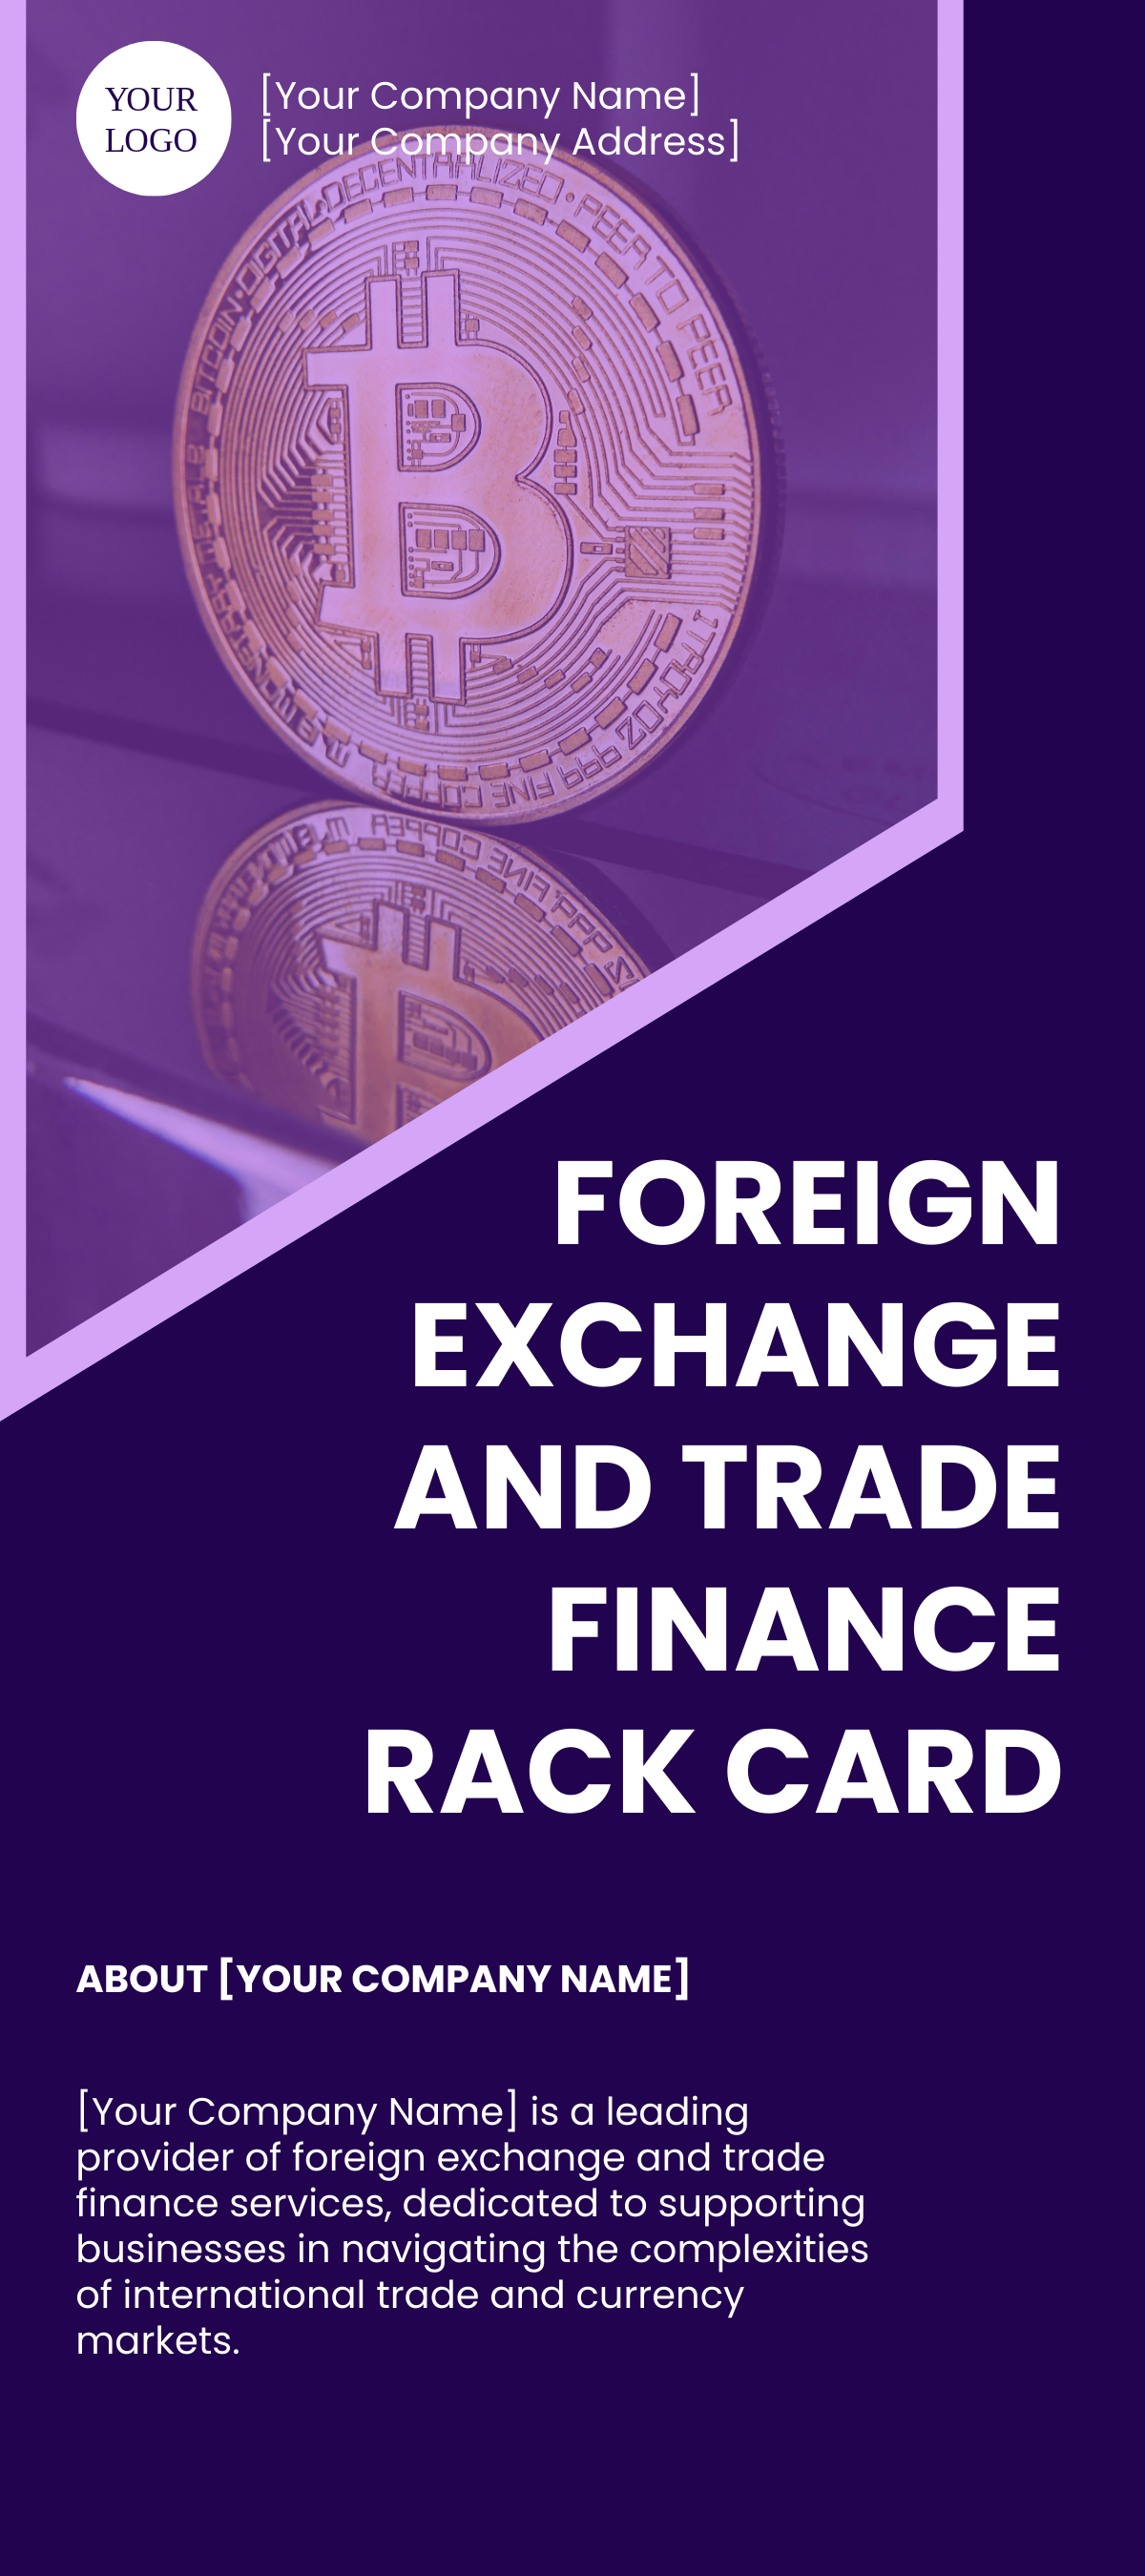 Free Foreign Exchange and Trade Finance Rack Card Template